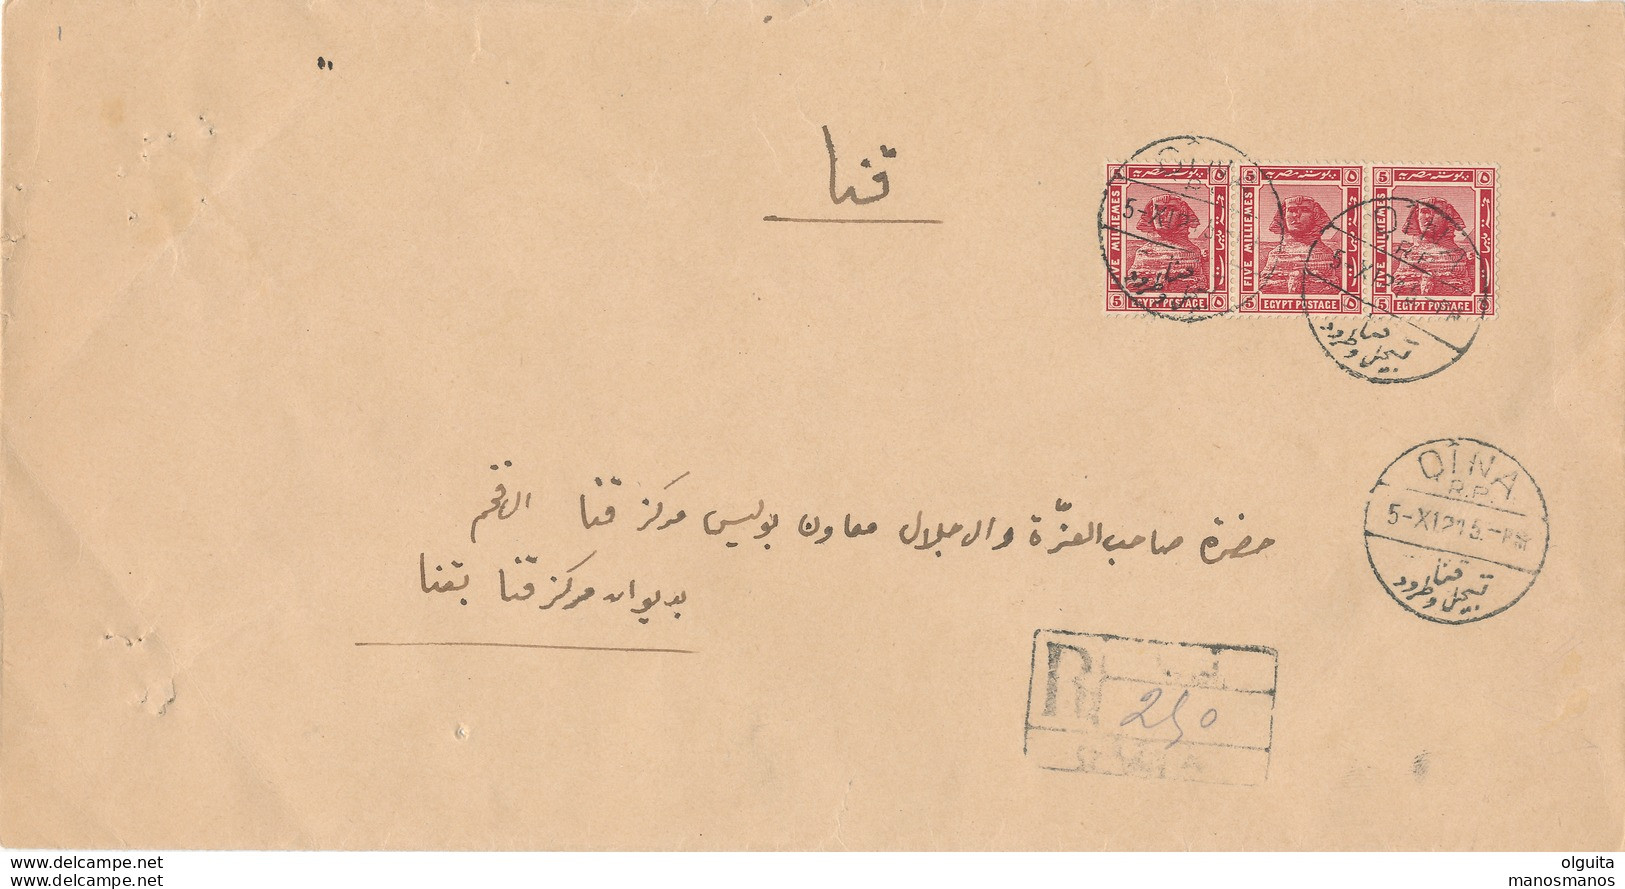 769/30 -- EGYPT DeLaRue '14 REGISTERED - Cover Franked 15 Mills QINA 1921 + Boxed R - 1915-1921 British Protectorate